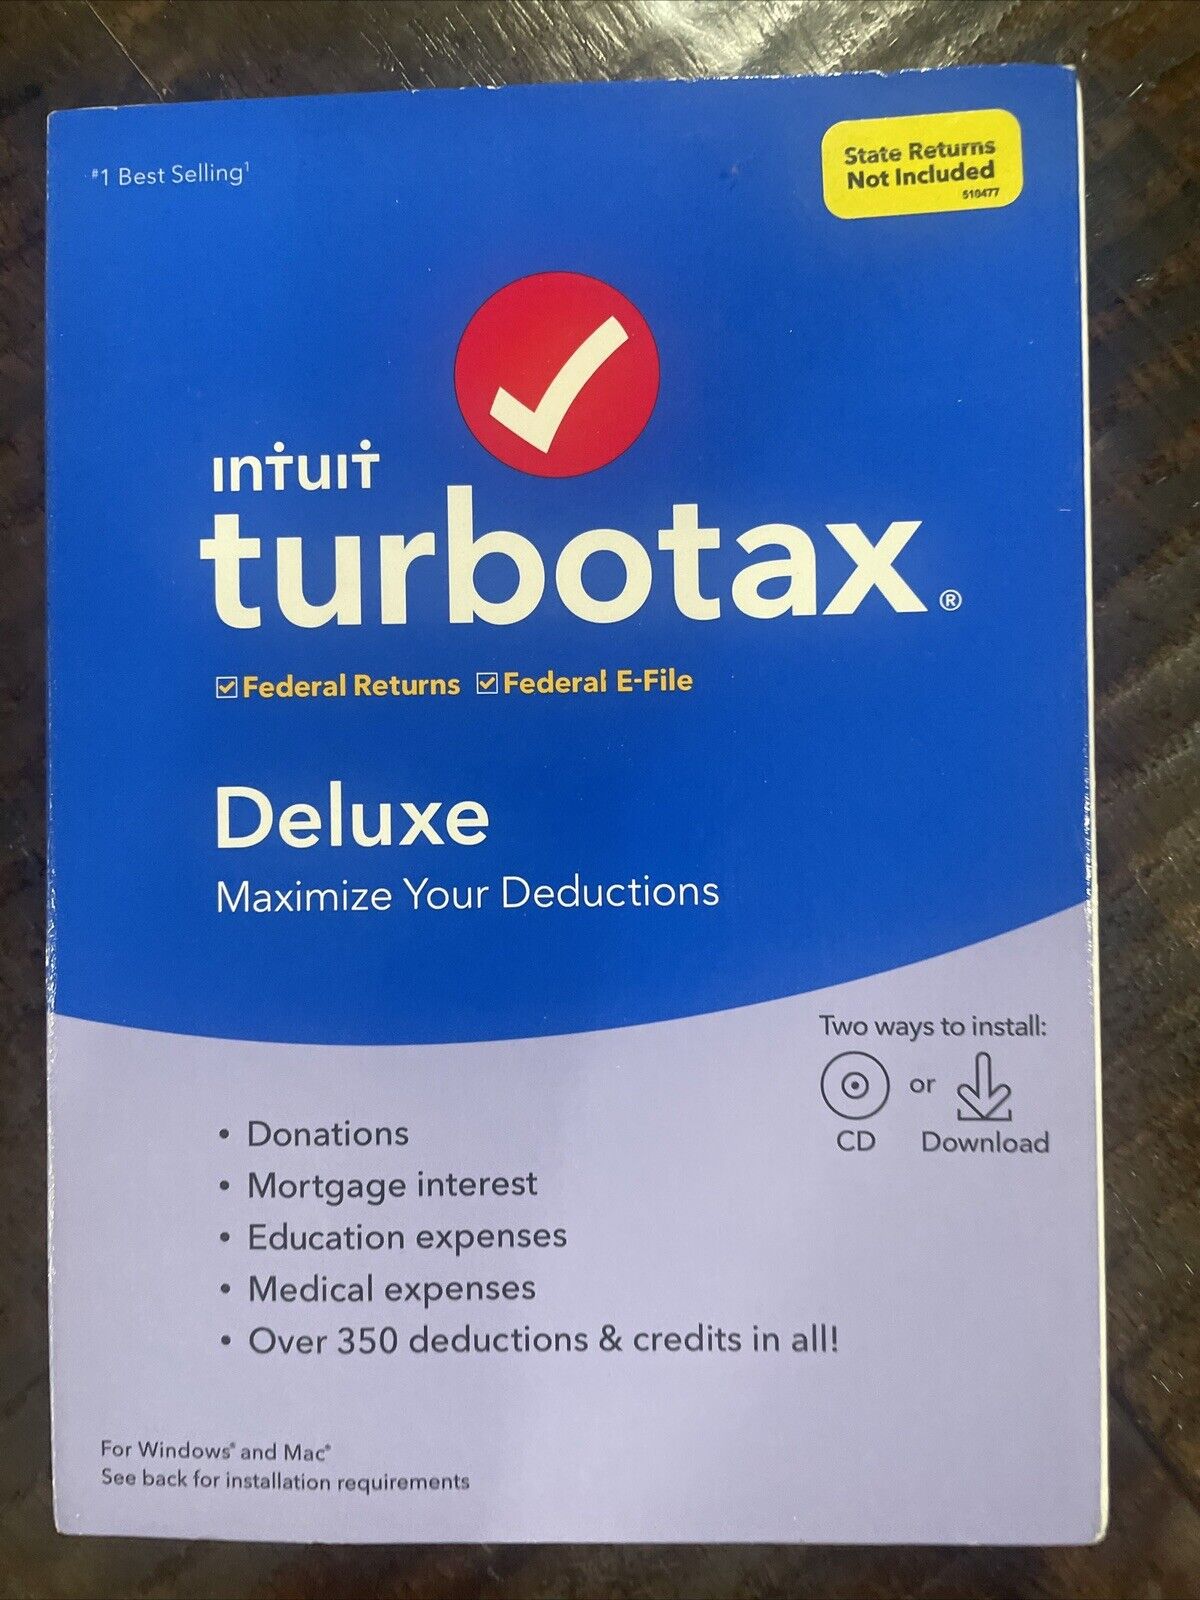 TurboTax Deluxe 2019 - Federal - E-File Sealed Intuit Windows/Mac CD *NO STATE*